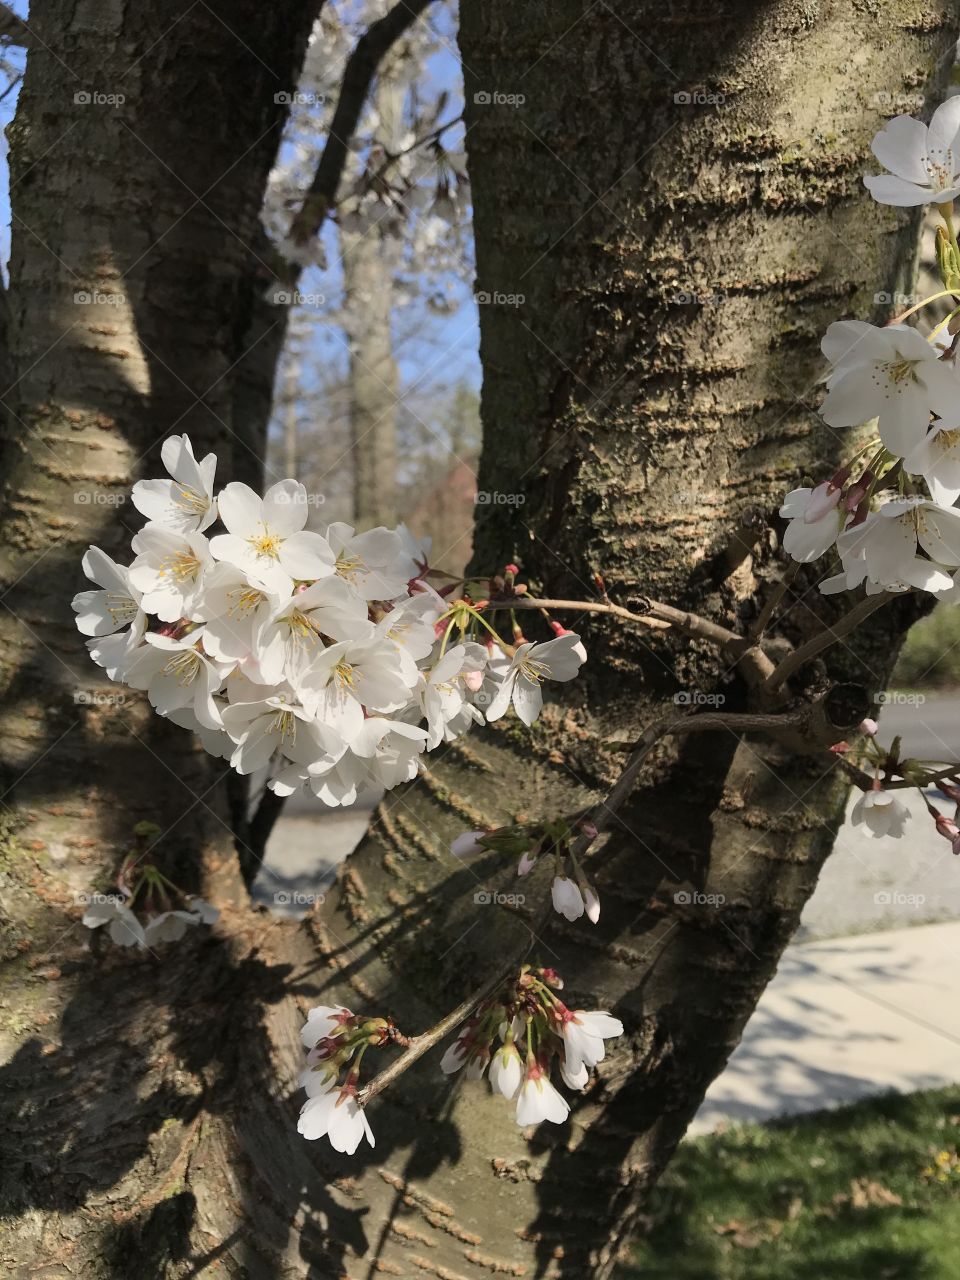 Ohio Crabtree’s in bloom during spring